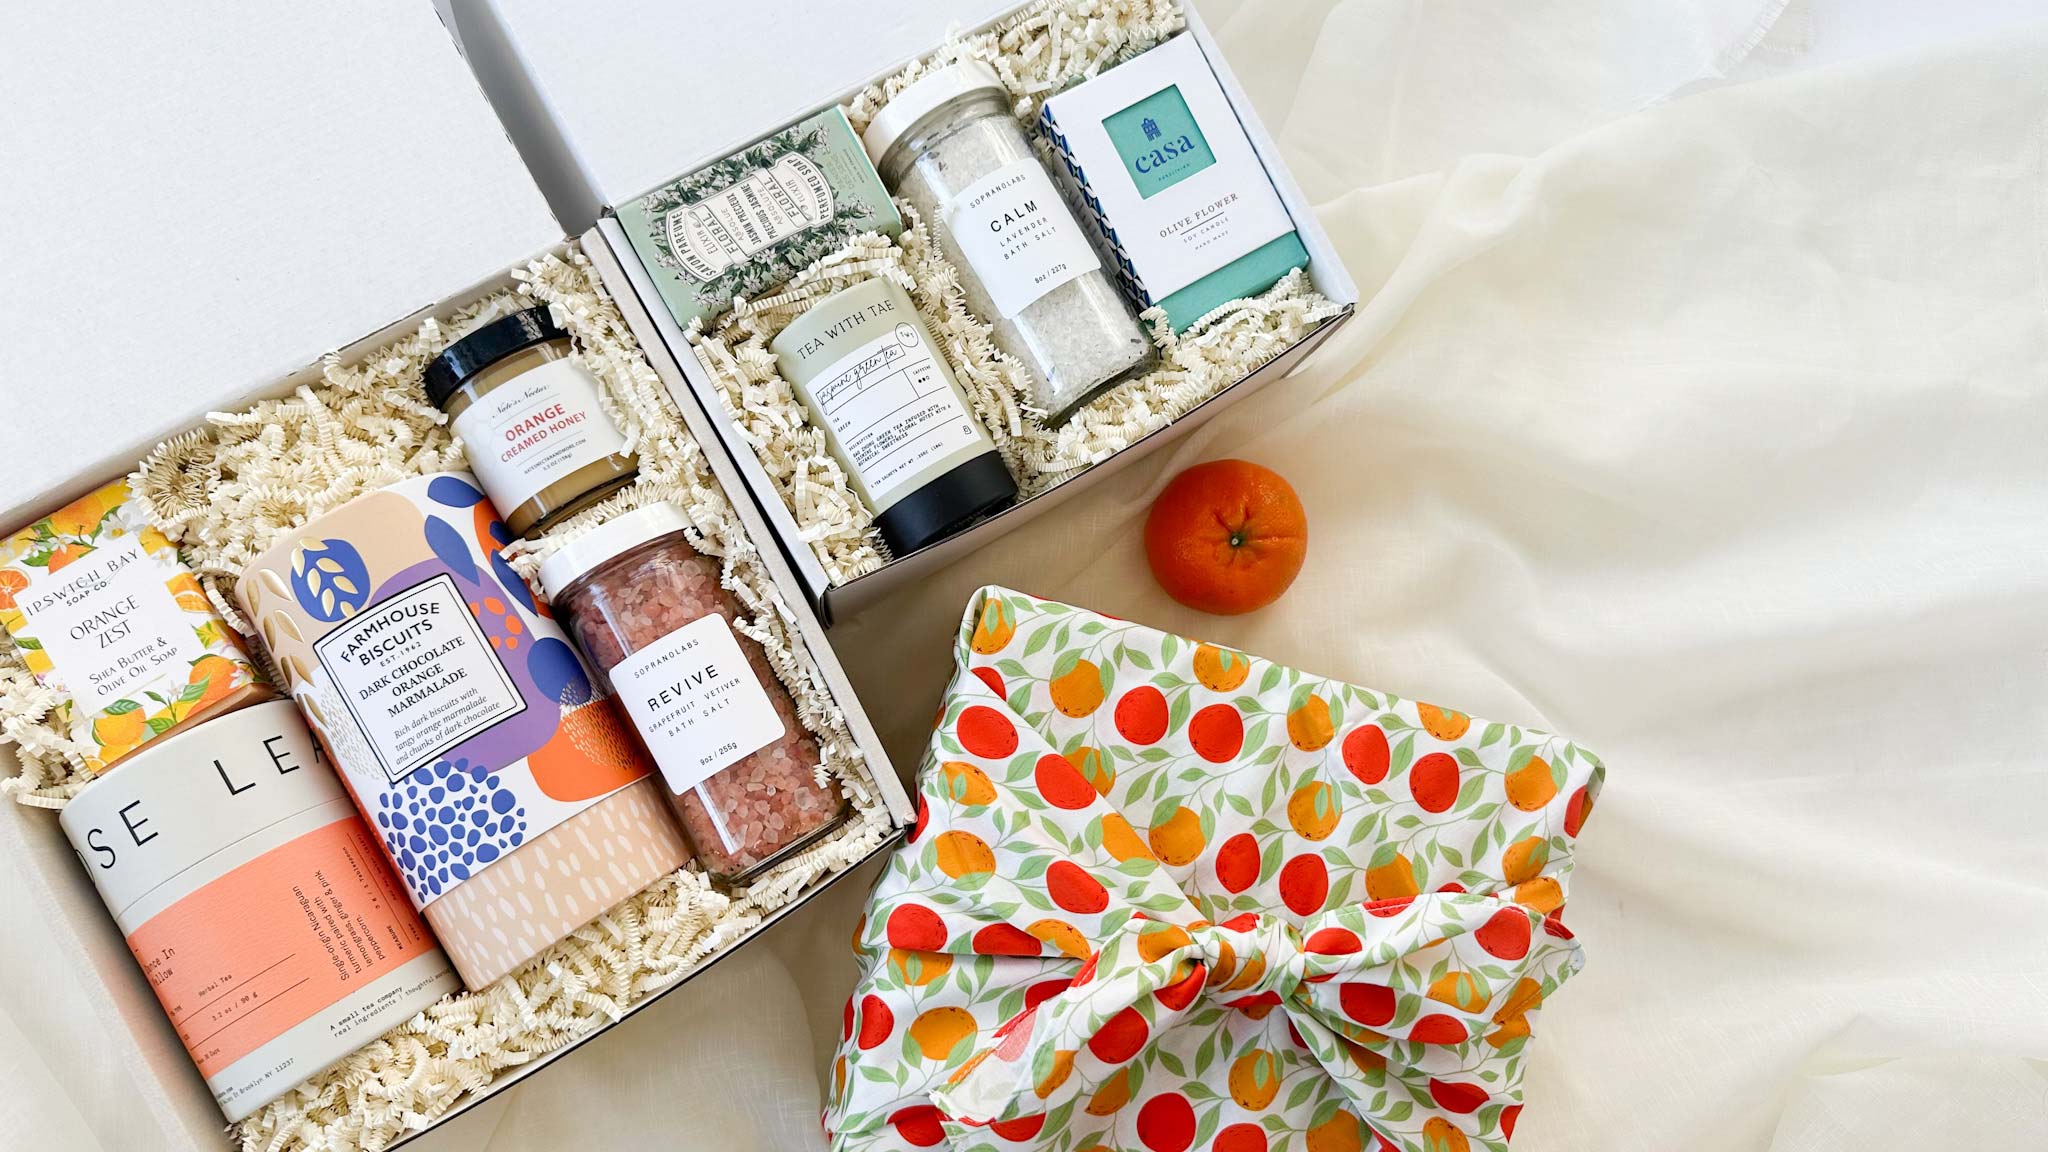 kadoo orange blossom gift box and spa calm gifts. Included: tea, cookie, candle, soap and more